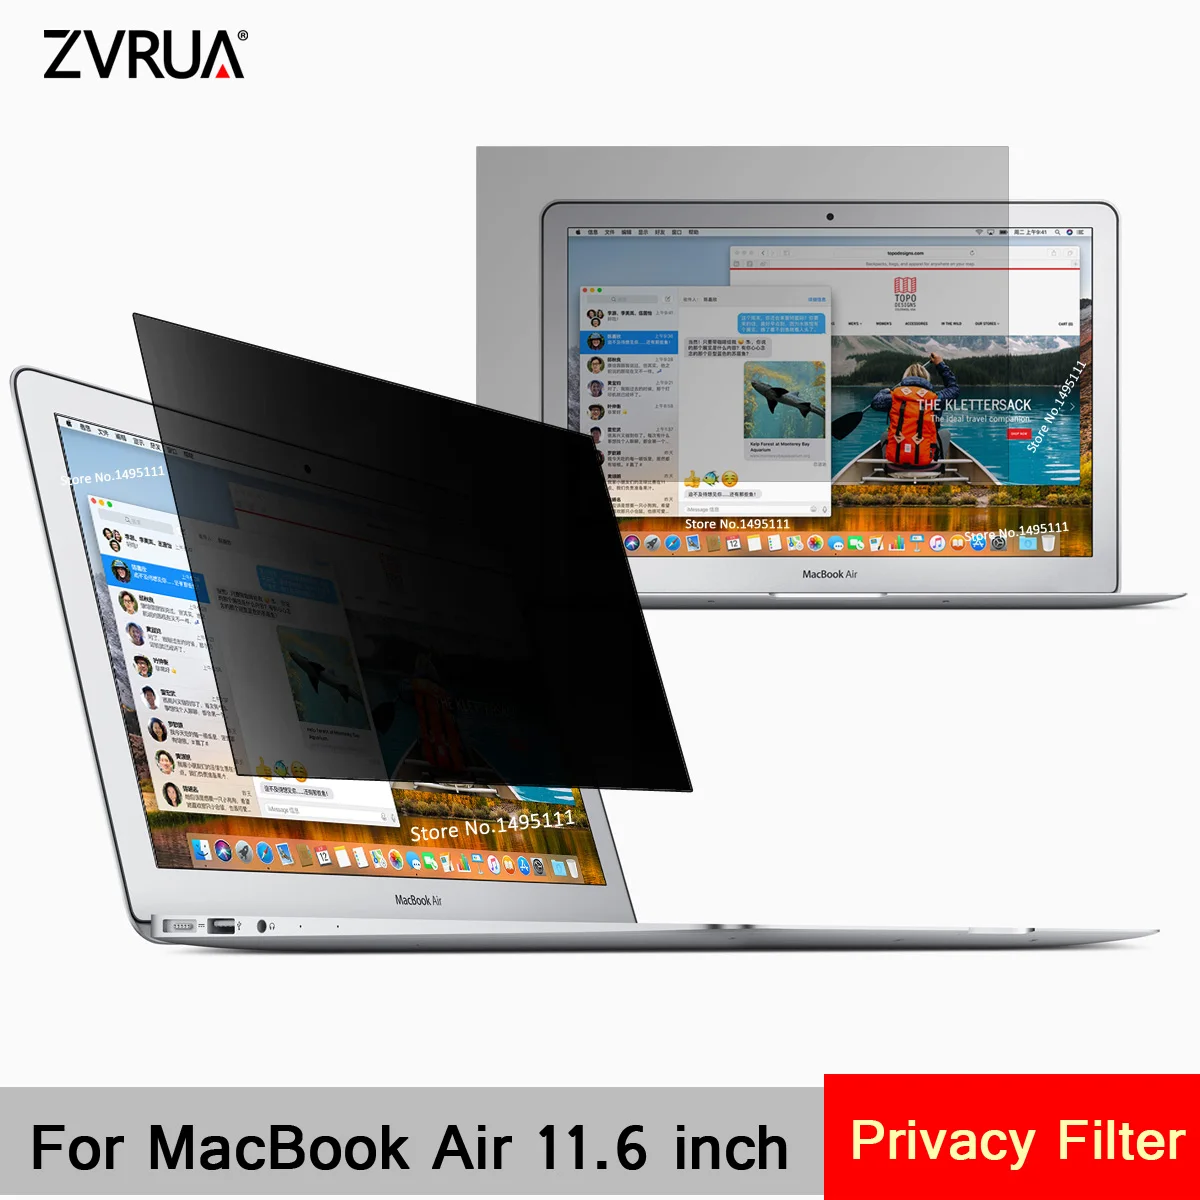 For Apple MacBook Air 11.6 inch (256mm*144mm) Privacy Filter Laptop Notebook Anti-glare Screen protector Protective film